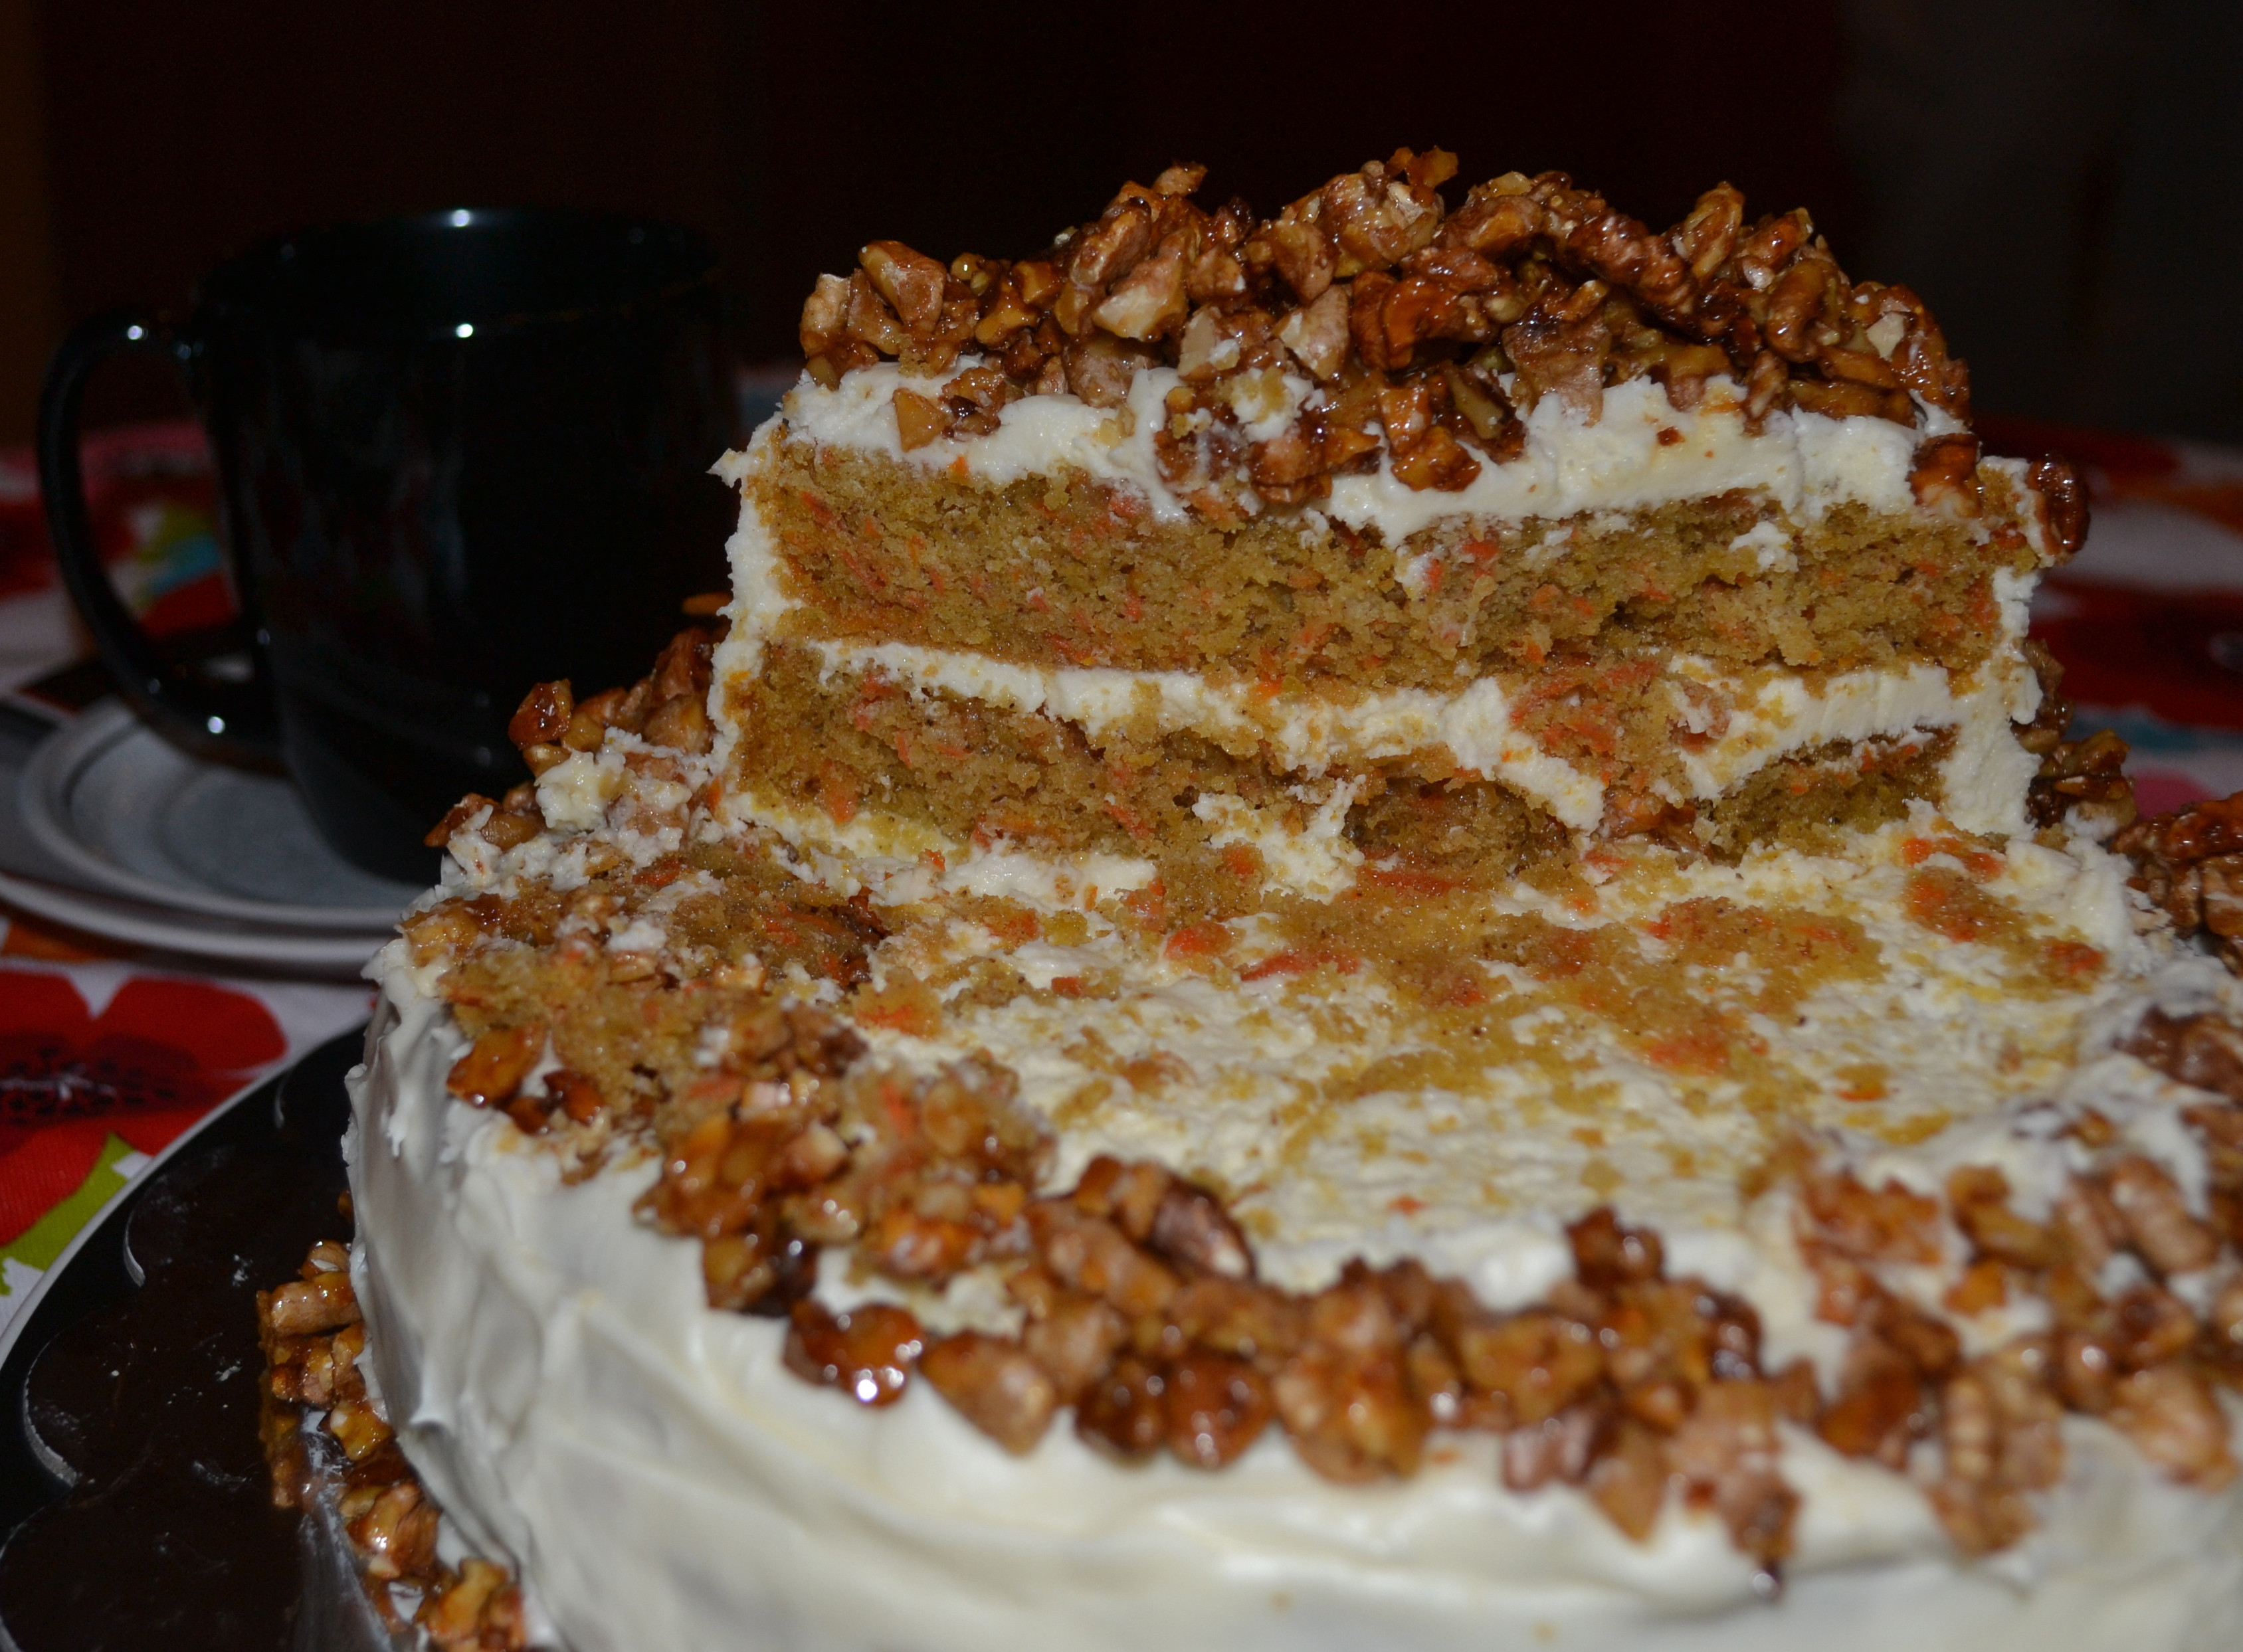 Carrot Cake Wedding Cake
 Autumn Carrot Wedding Cake with Cream Cheese Frosting